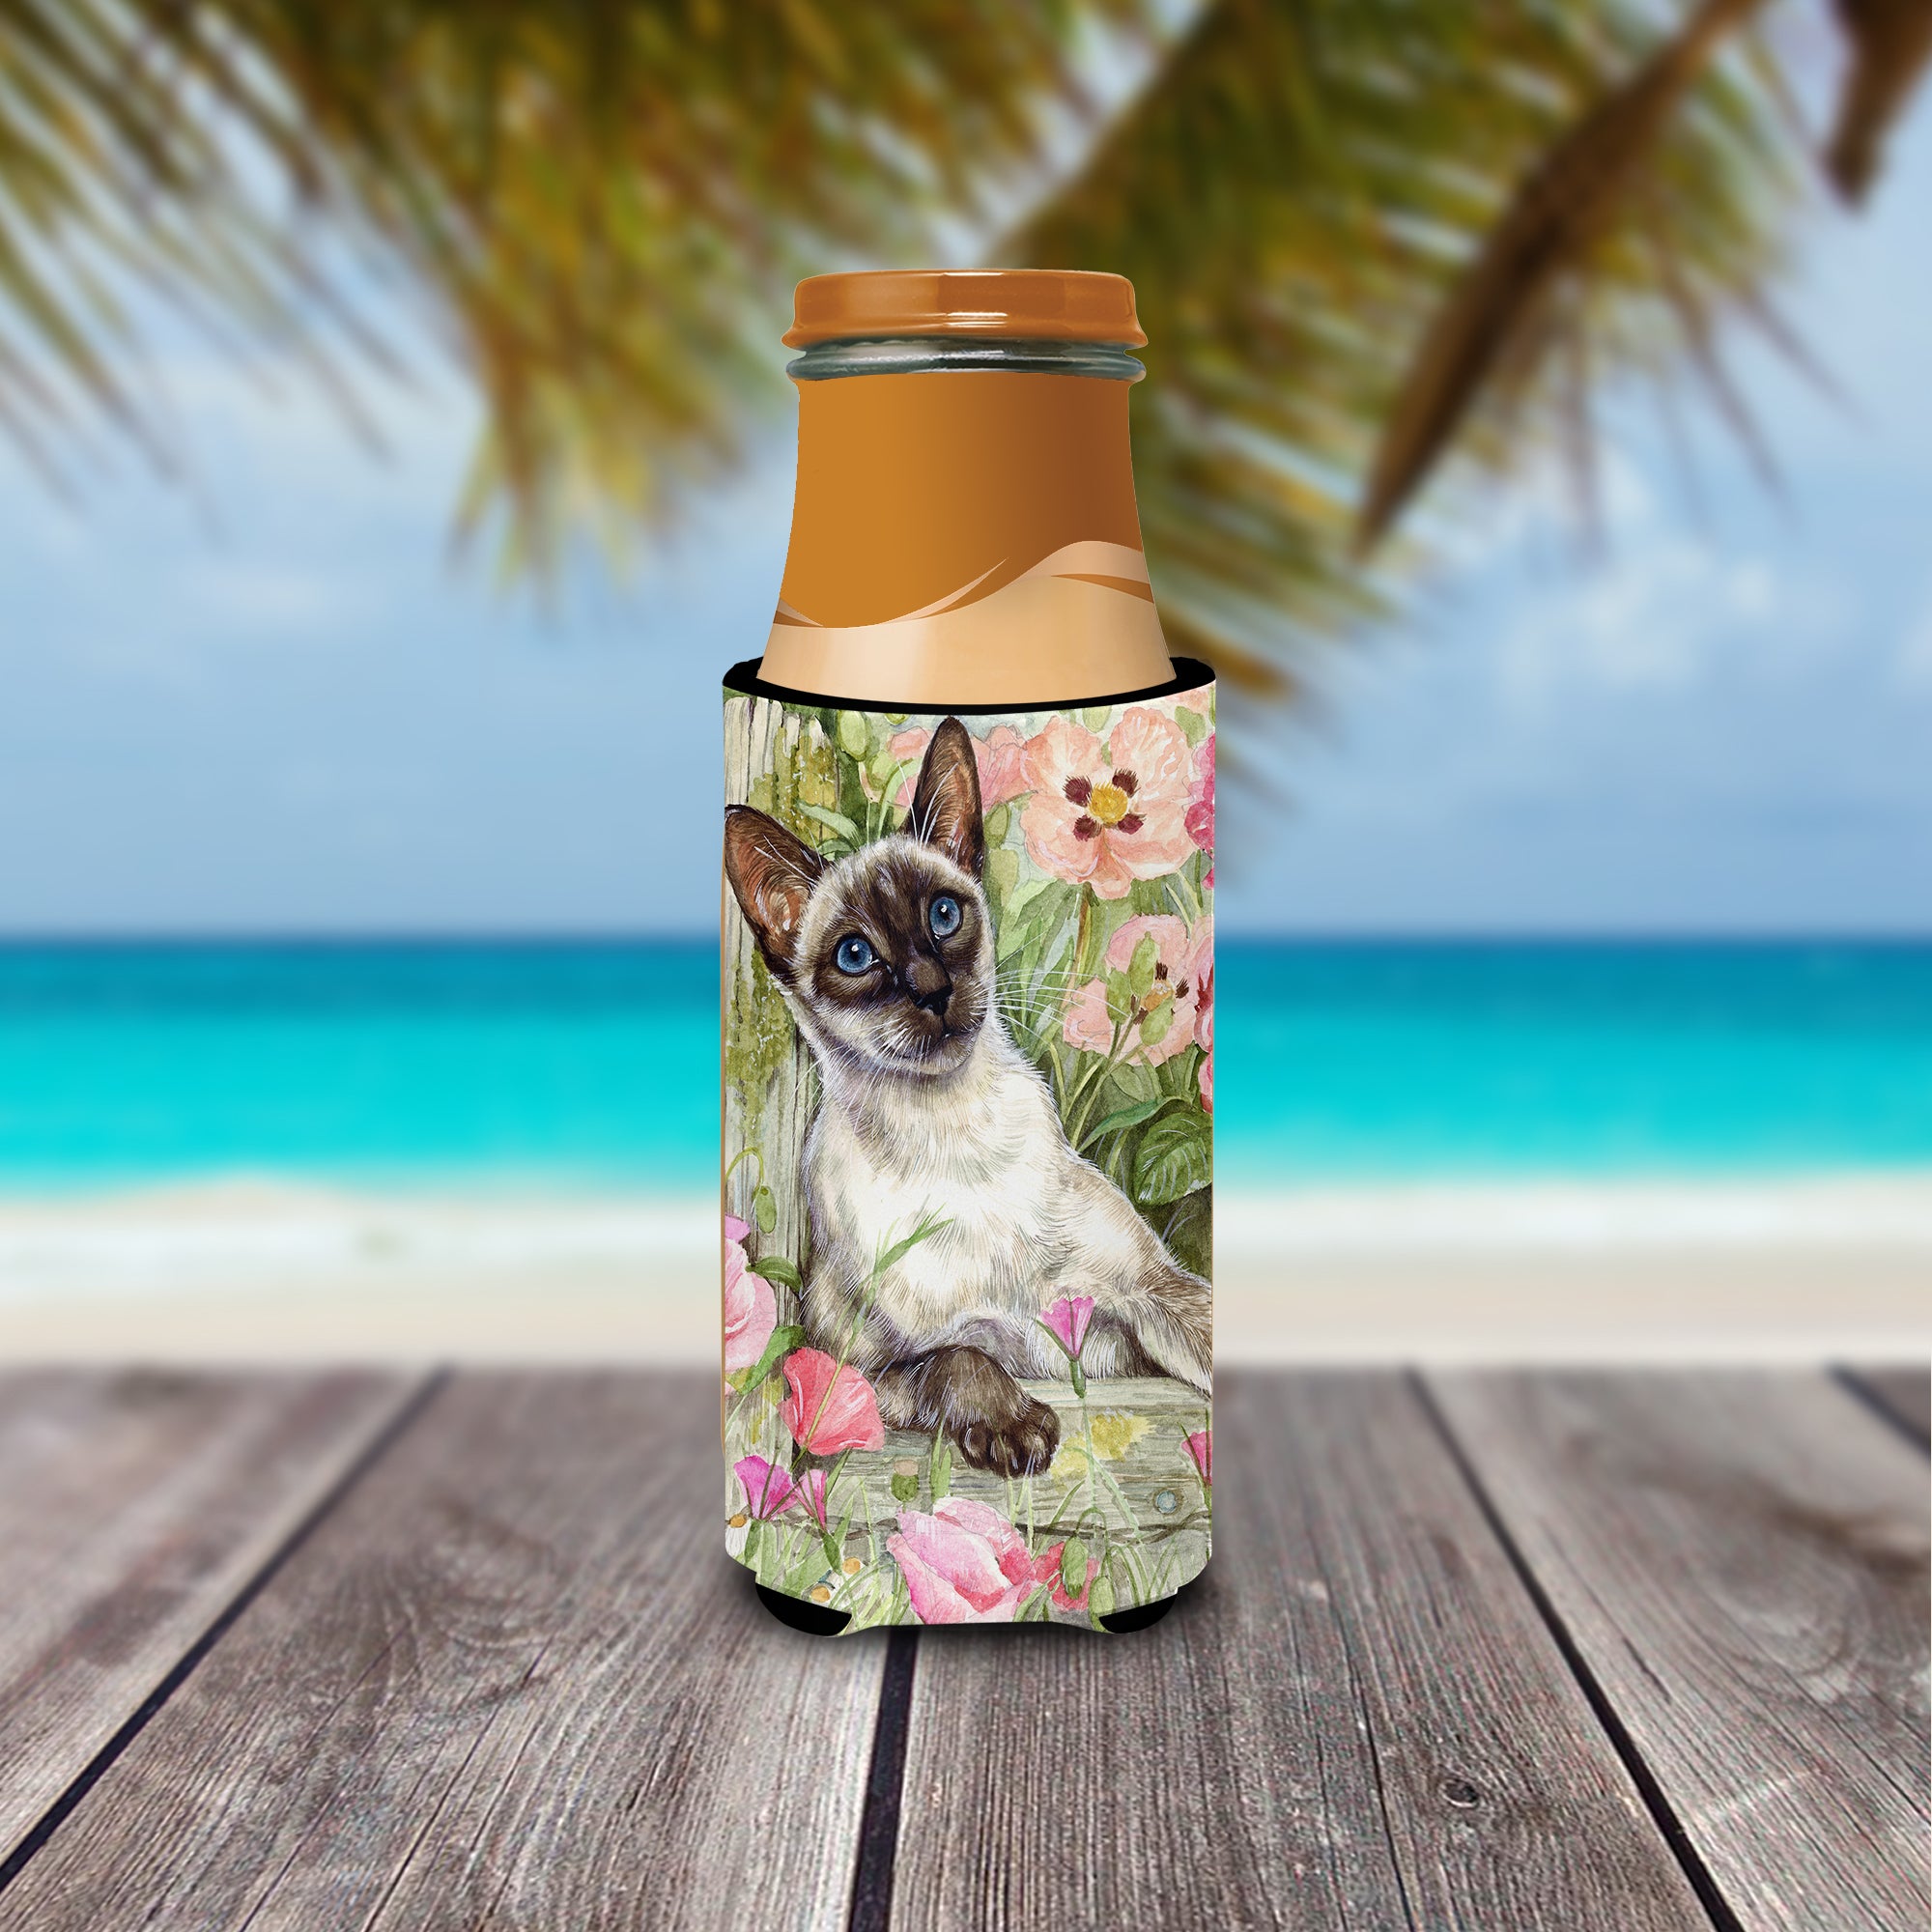 Siamese cat in the Roses Ultra Beverage Insulators for slim cans CDCO0033MUK